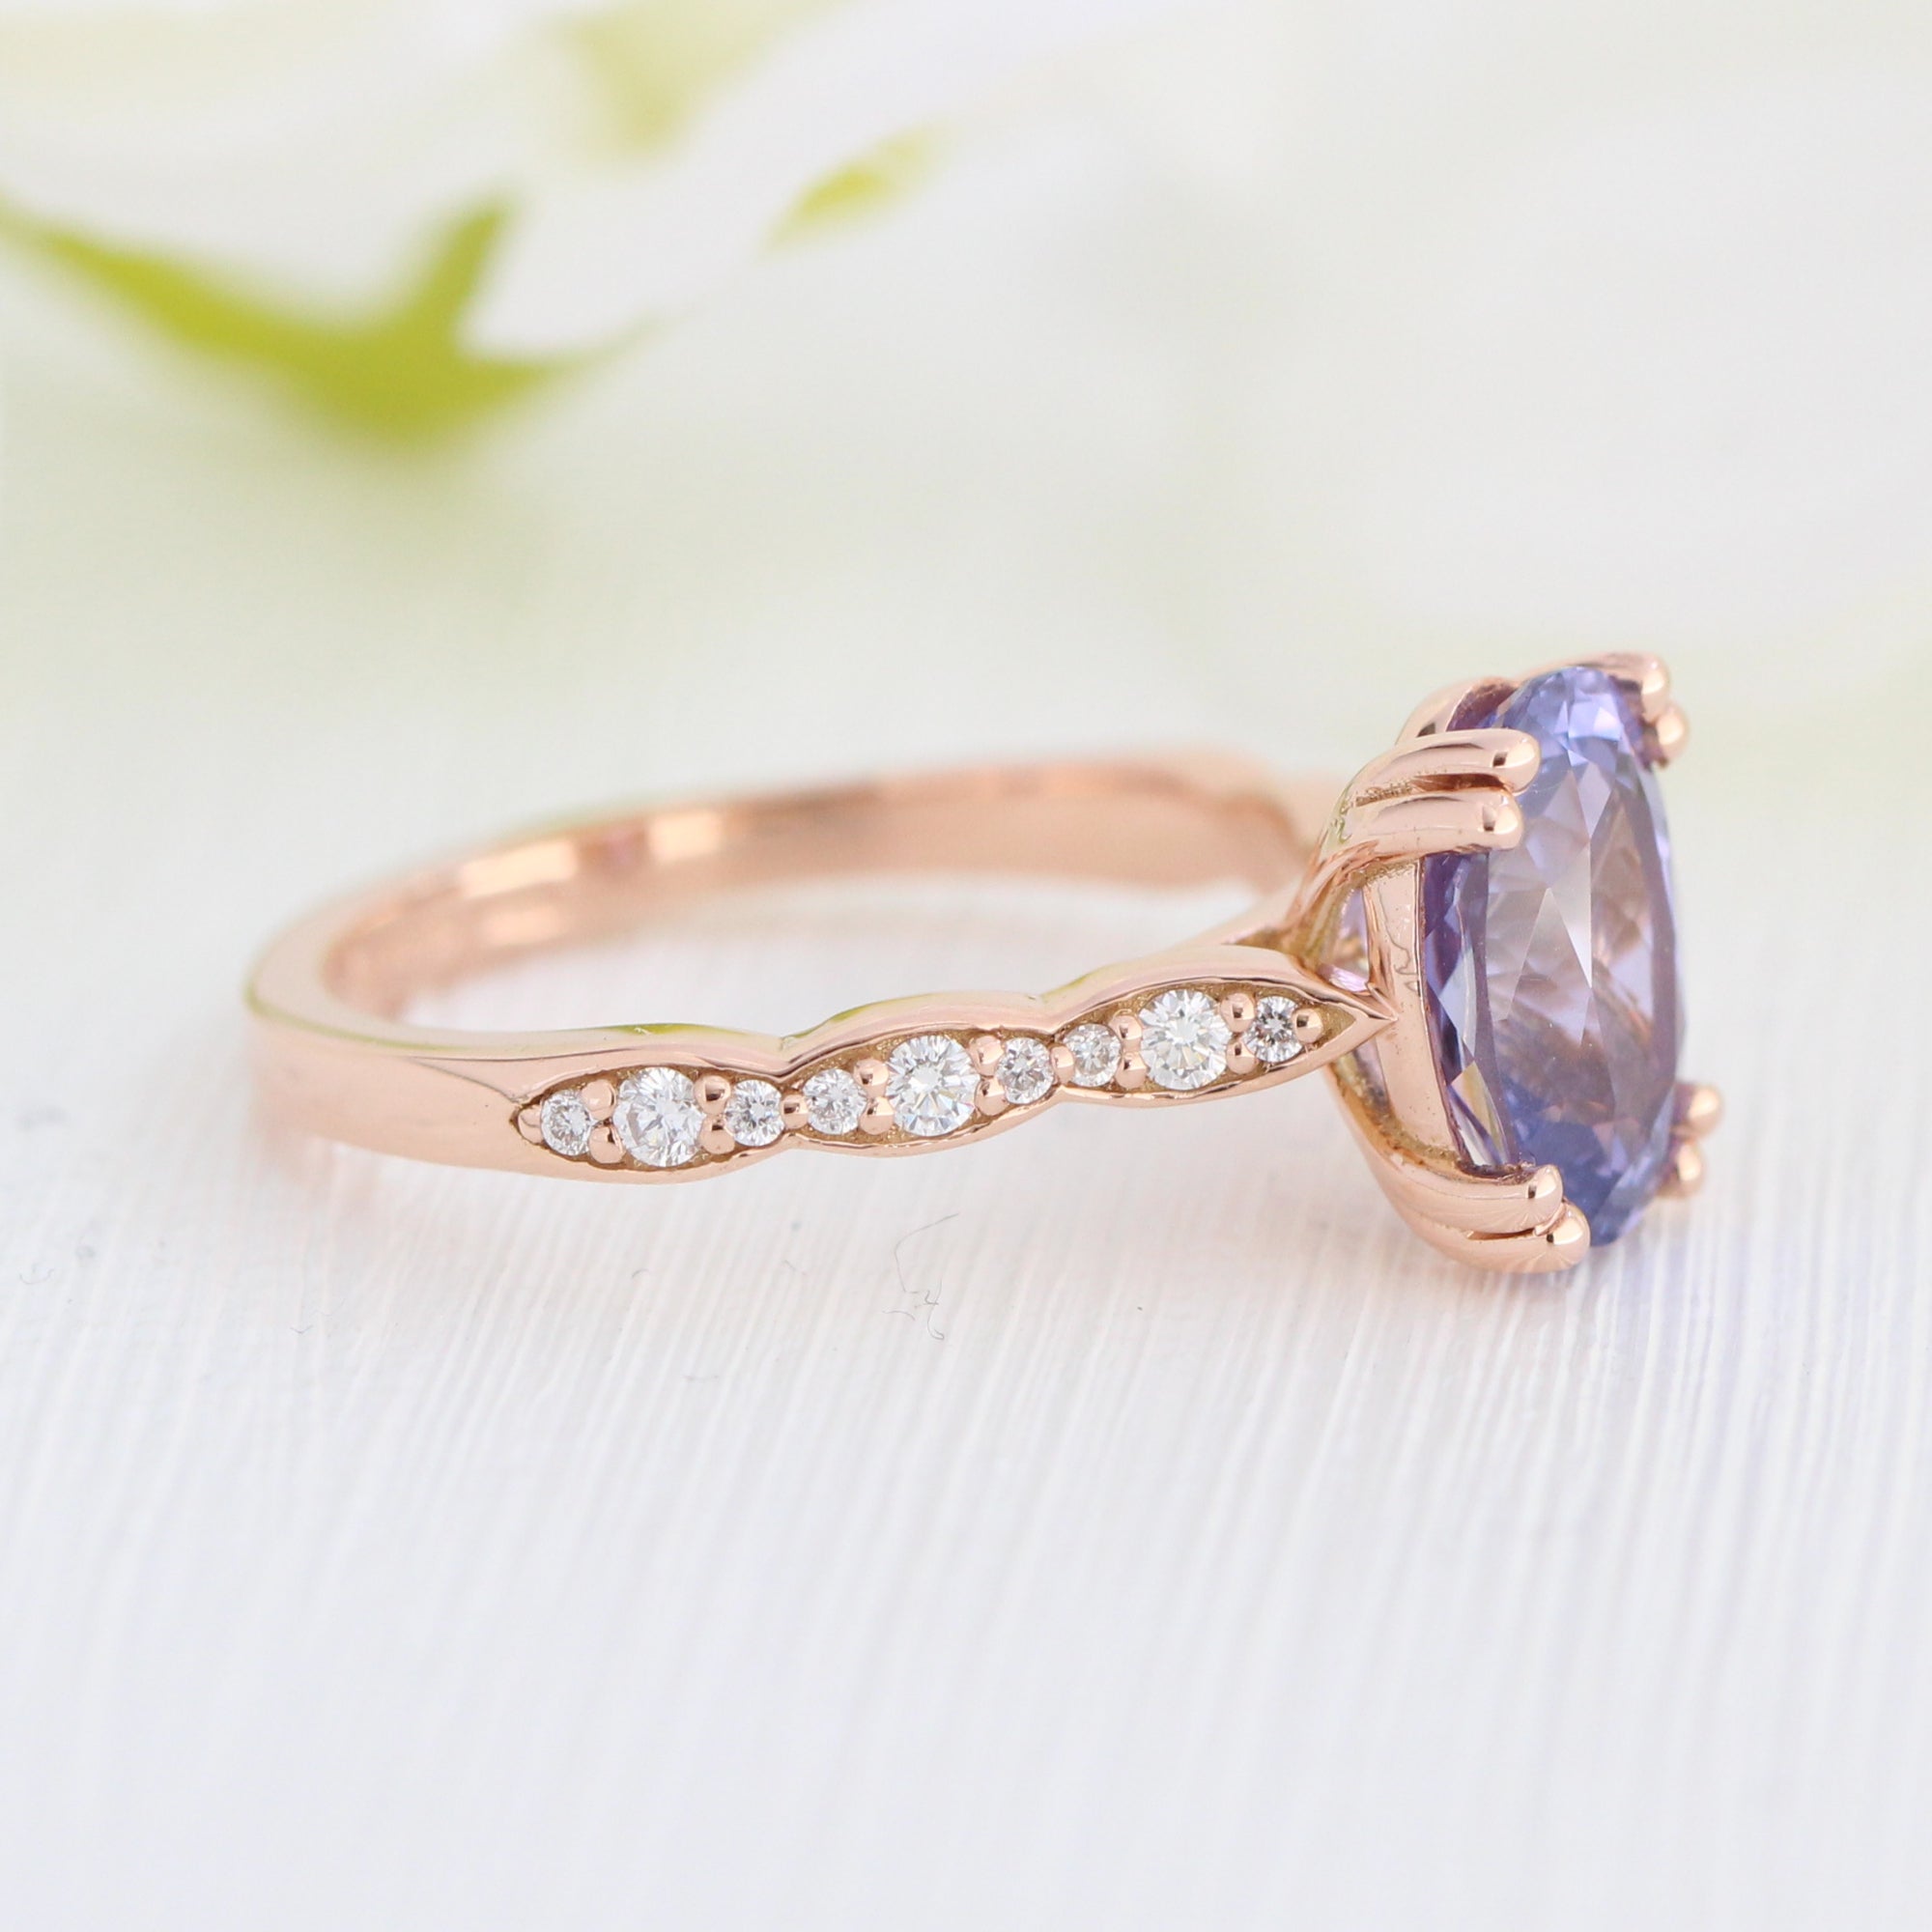 Large oval purple sapphire ring rose gold solitaire engagement ring la more design jewelry